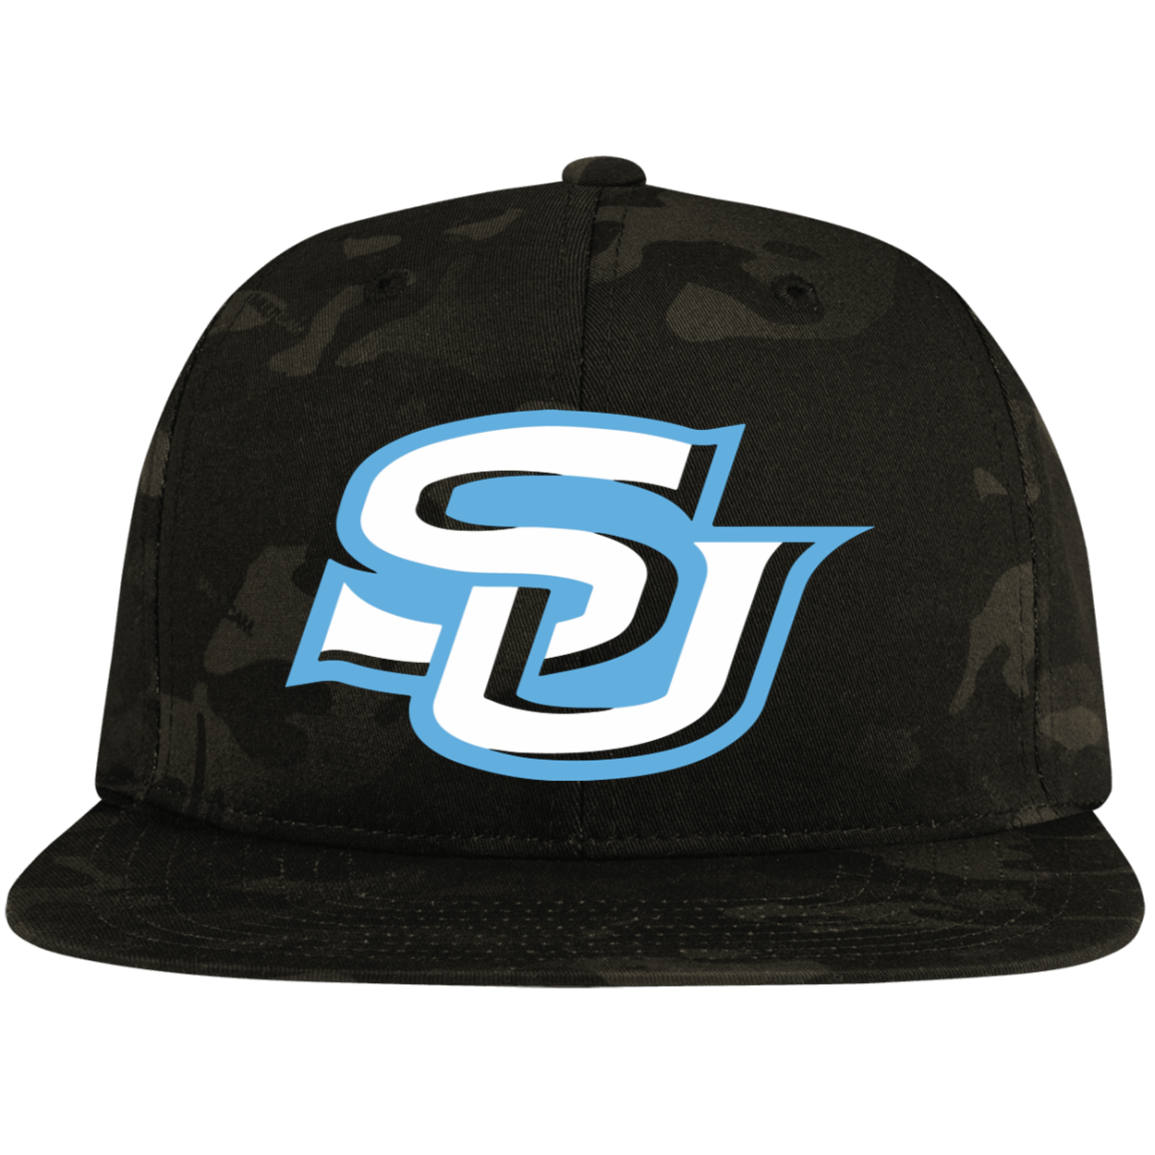 STC19 Embroidered Flat Bill High-Profile Snapback Hat